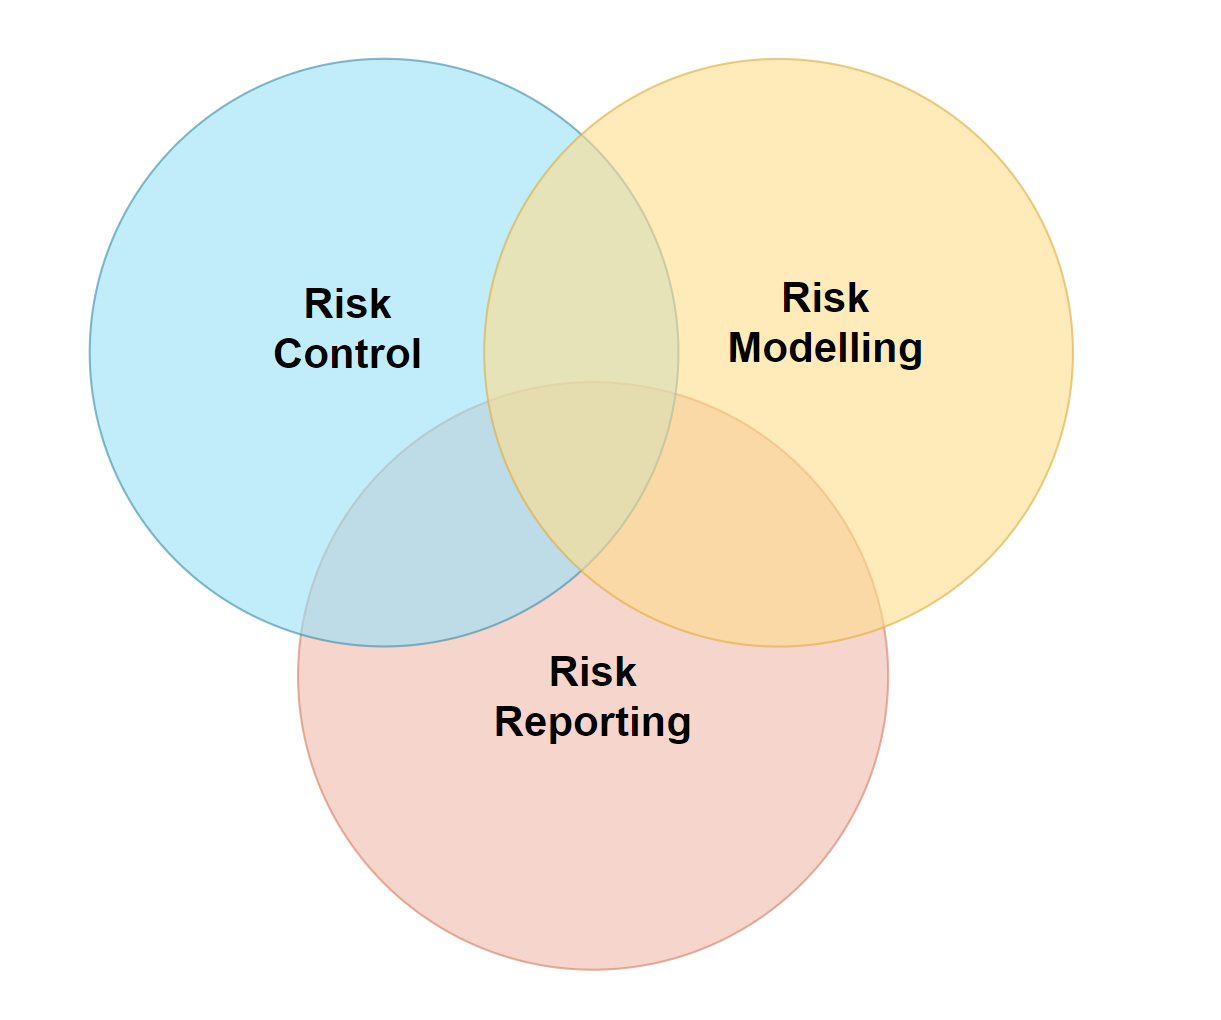 market risk case study examples